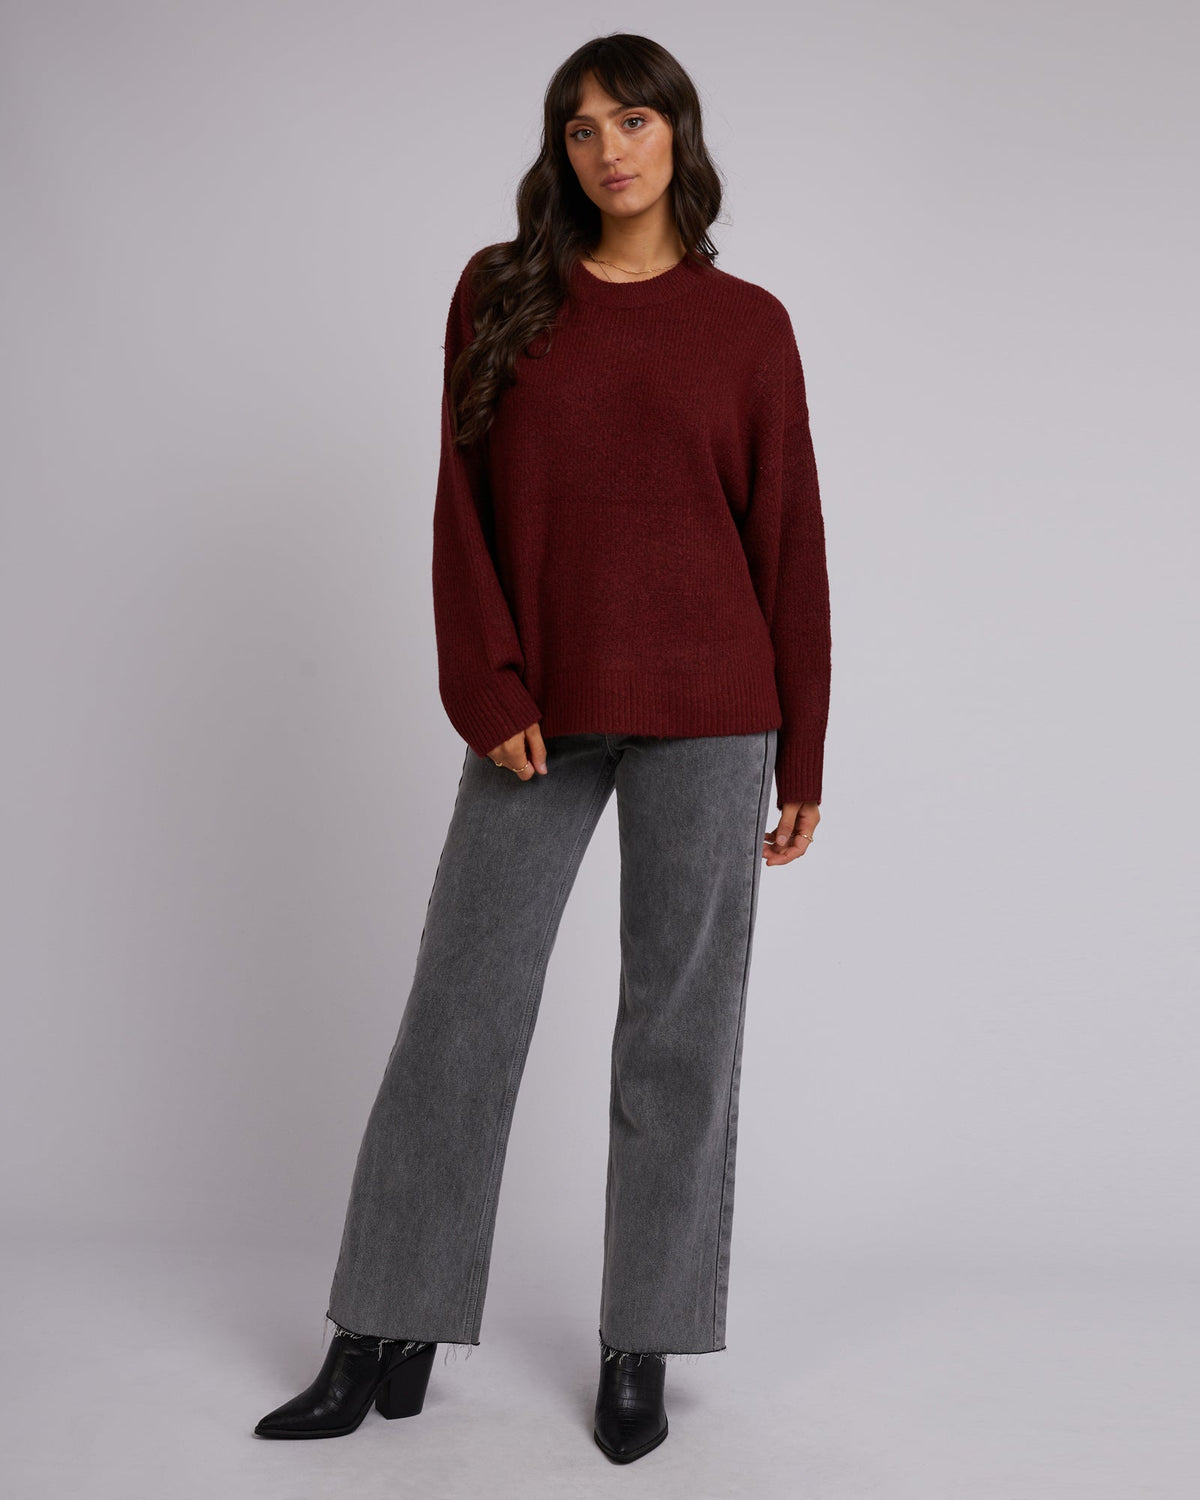 All About Eve-Kendal Knit Port-Edge Clothing